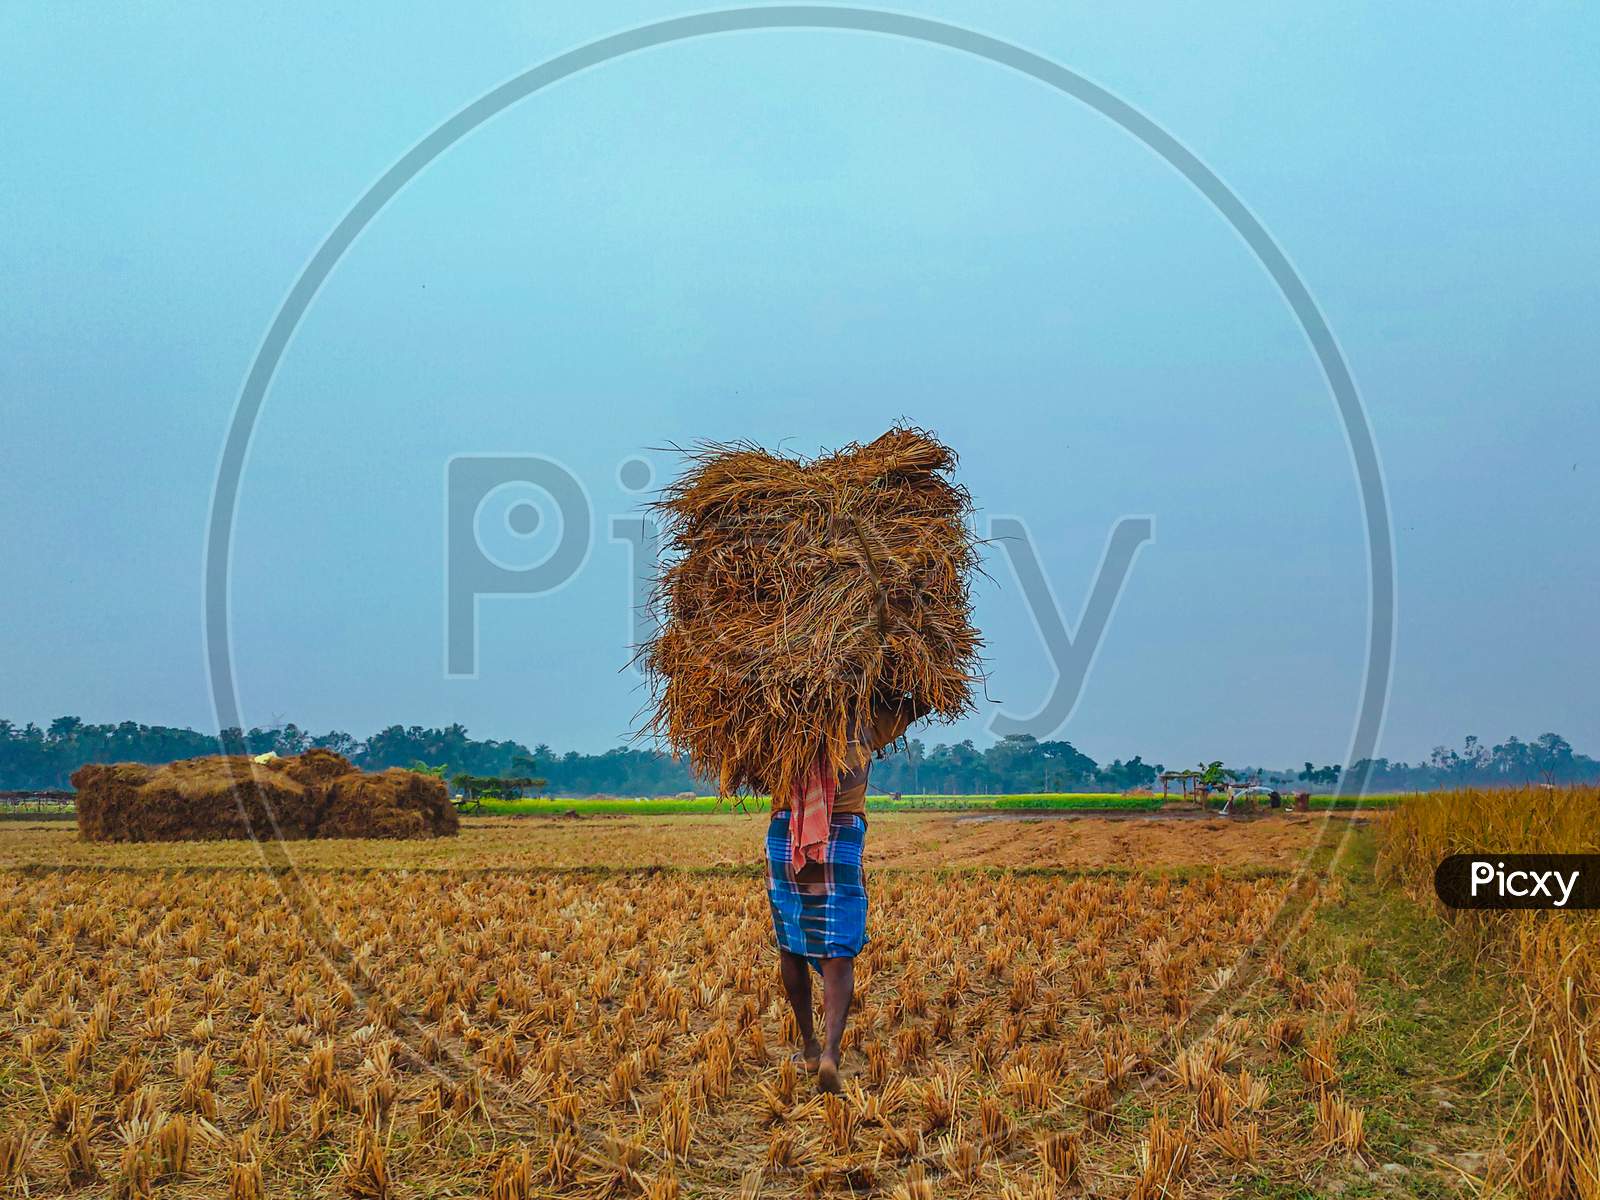 A Farmer loading paddy tree in his shoulder.